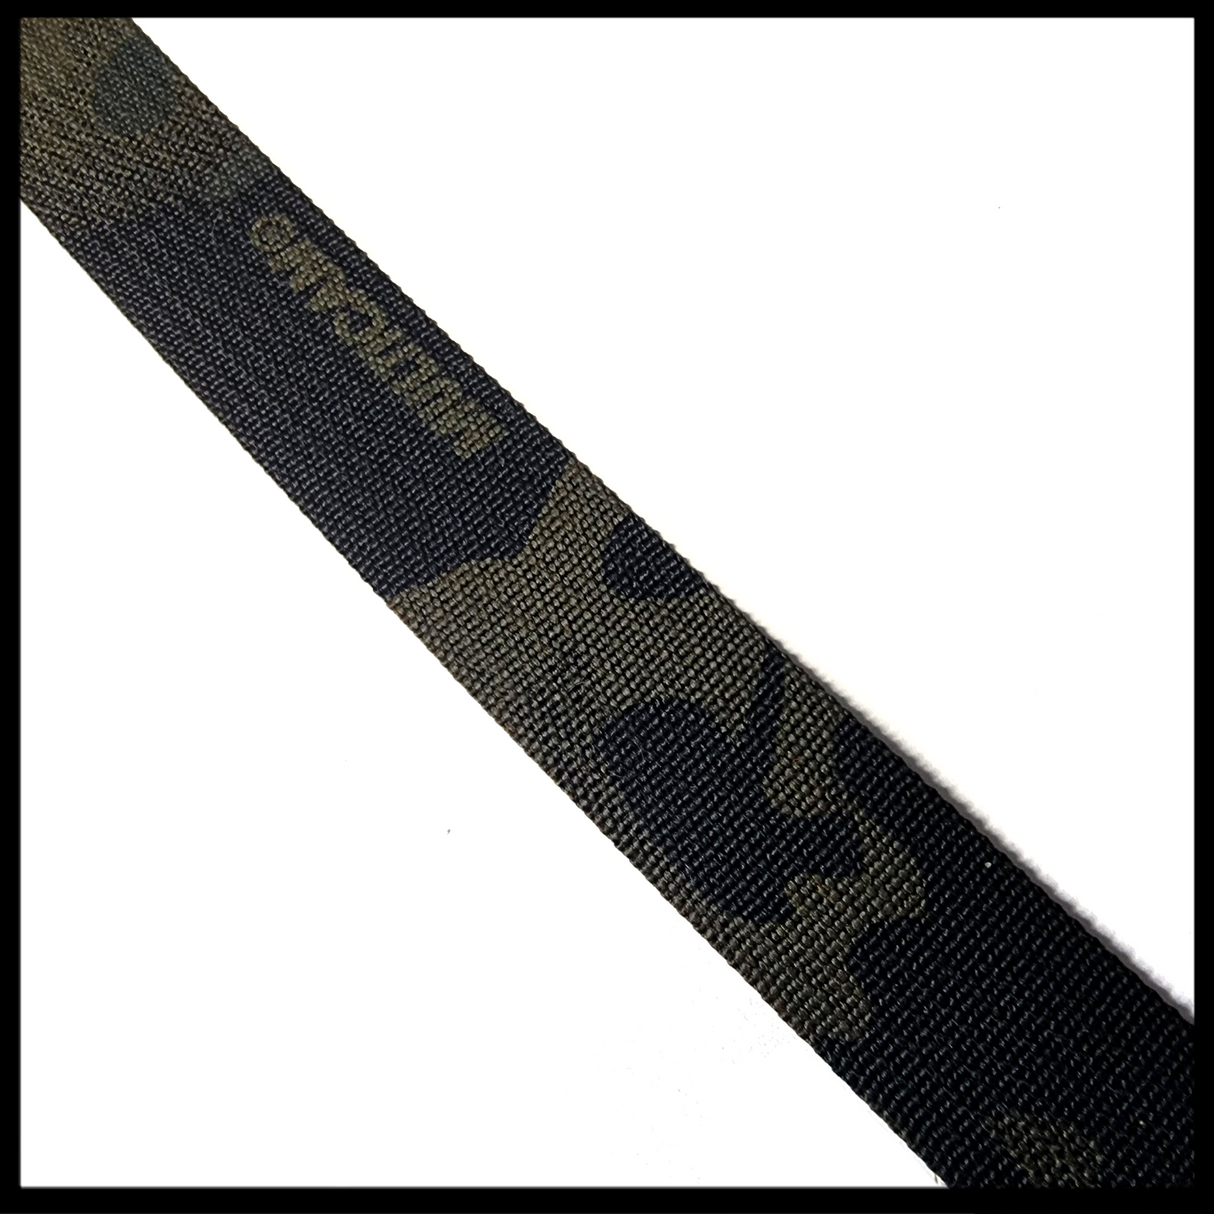 25mm / 1" Double Sided MIL-A-A 55301 Mil-Spec Nylon Webbing Multicam Black With CTEdge™